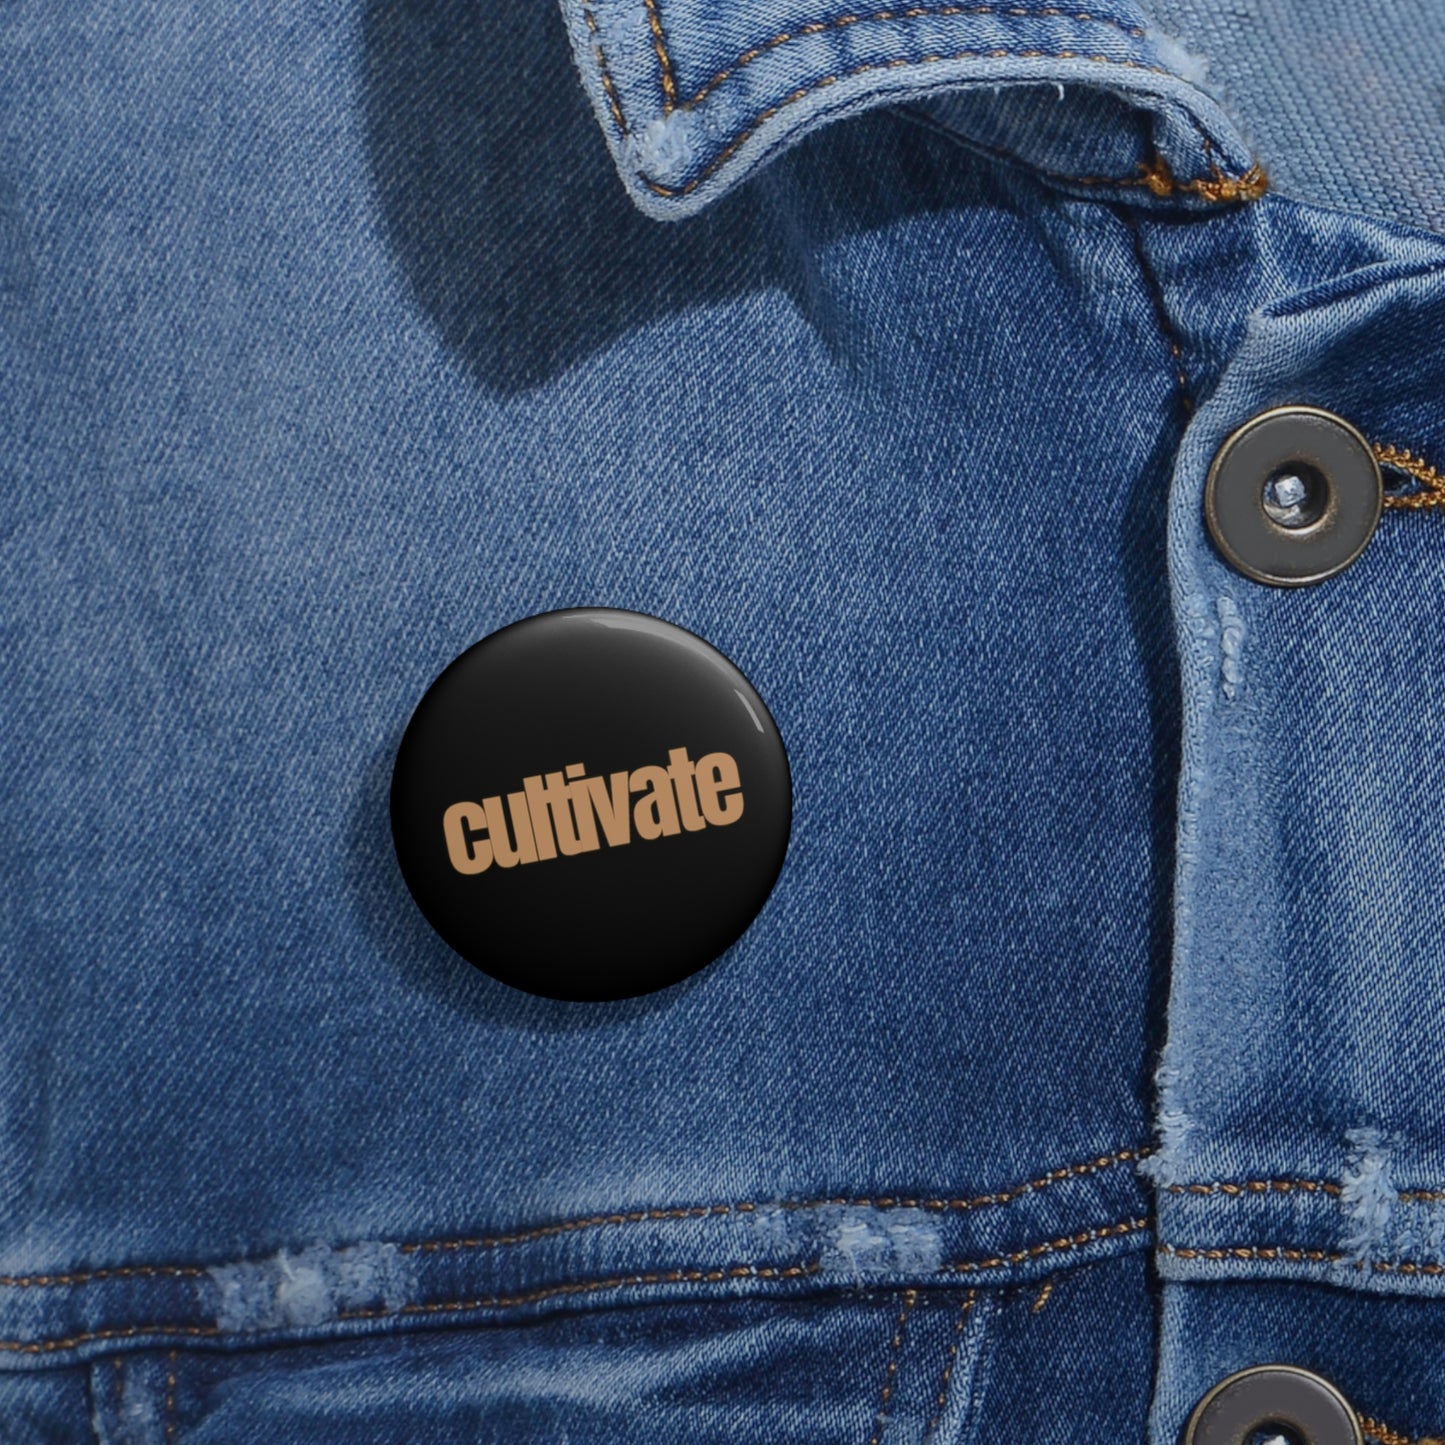 "cultivate" Pin Button - gold